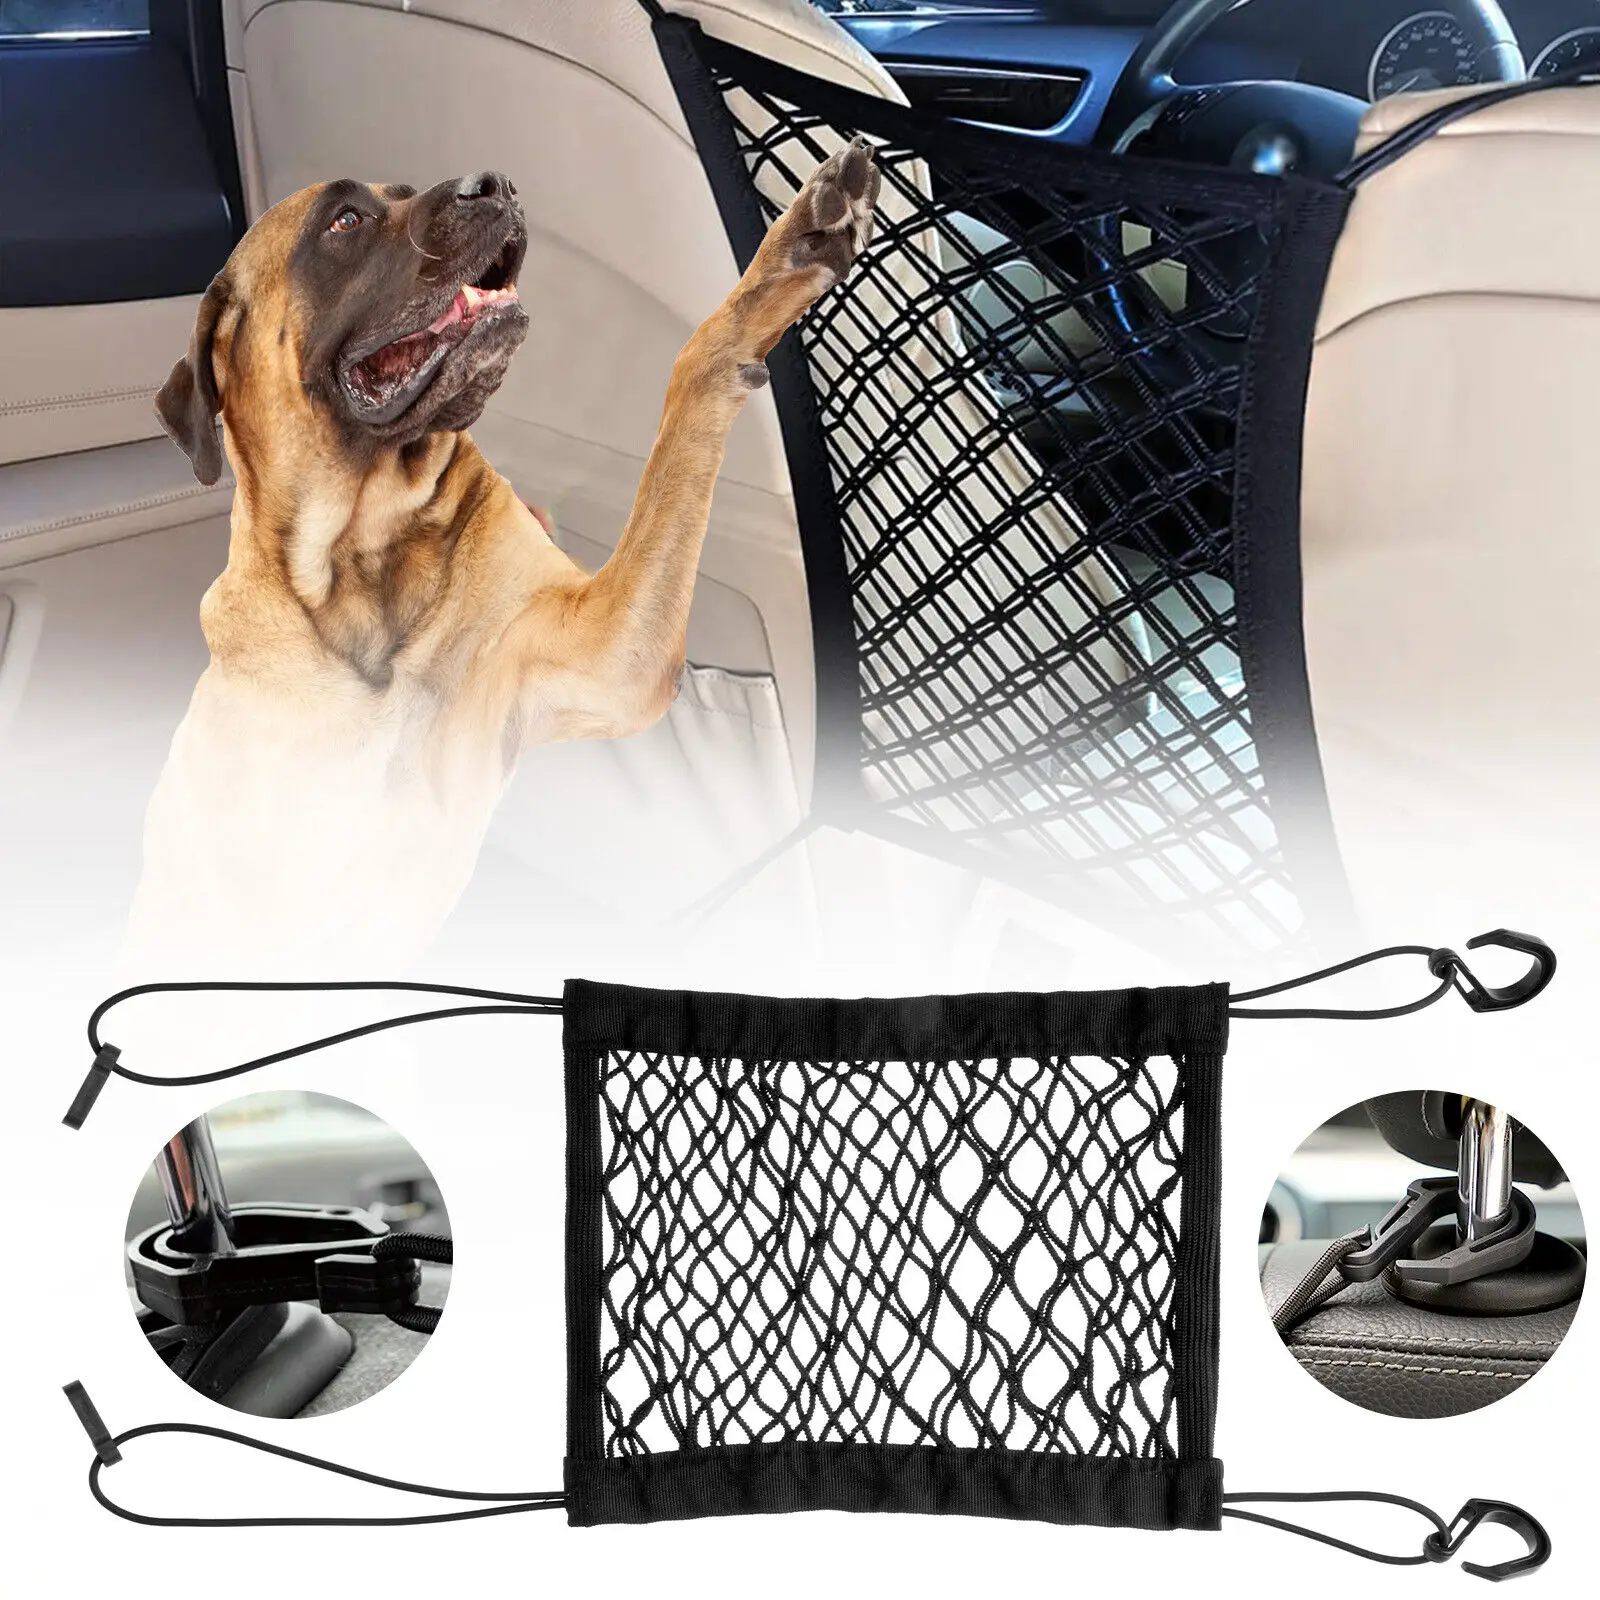 

Car Dog Pet Barrier Guard Back Seat Safety Protector Mesh Net For SUV Truck Van